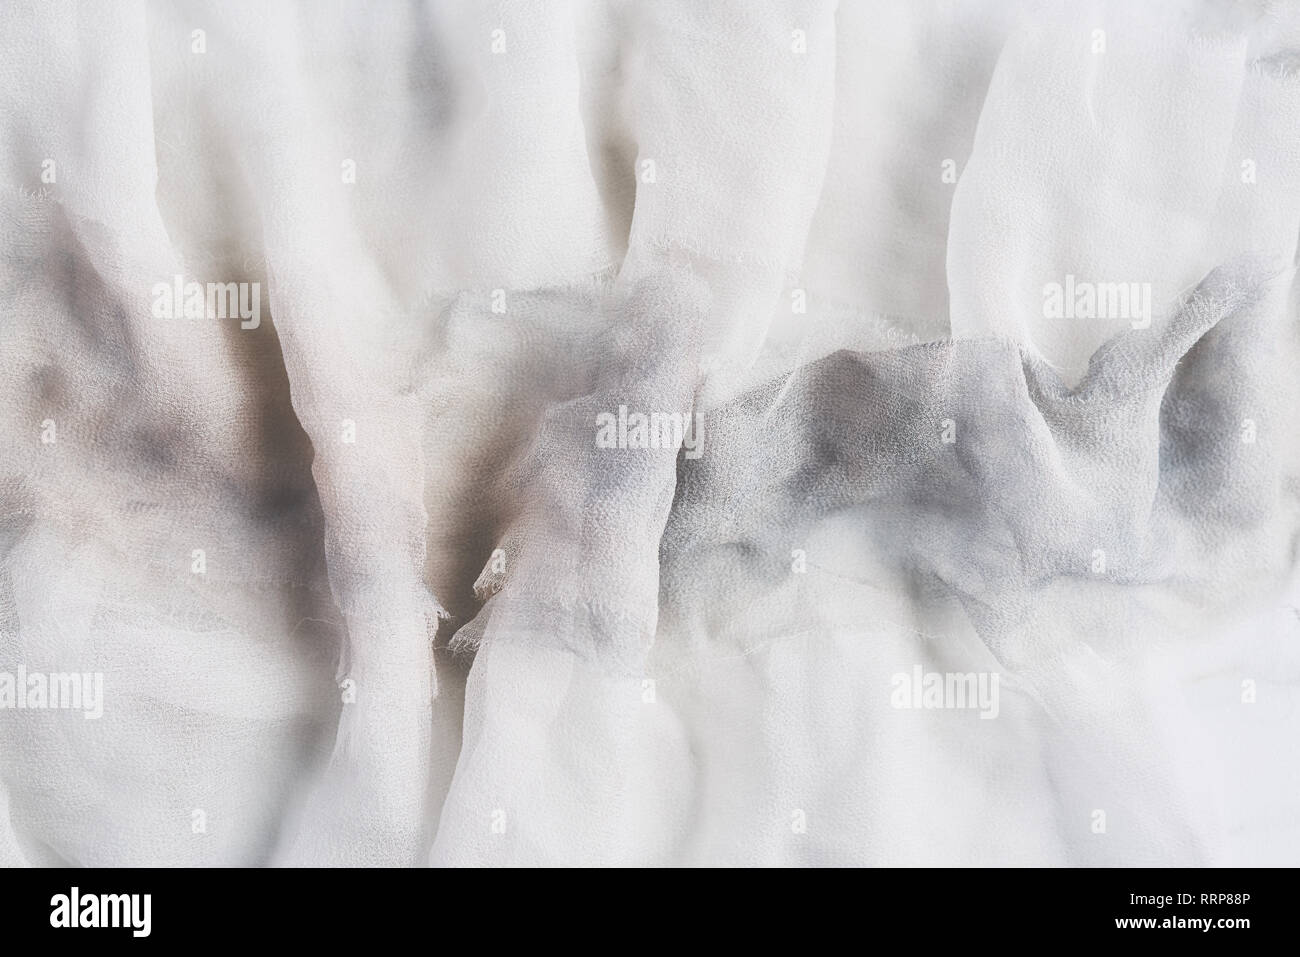 White and gray wrinkled silk. Air folds. Silk fabric texture for background or design element. Thin tissue. Stock Photo